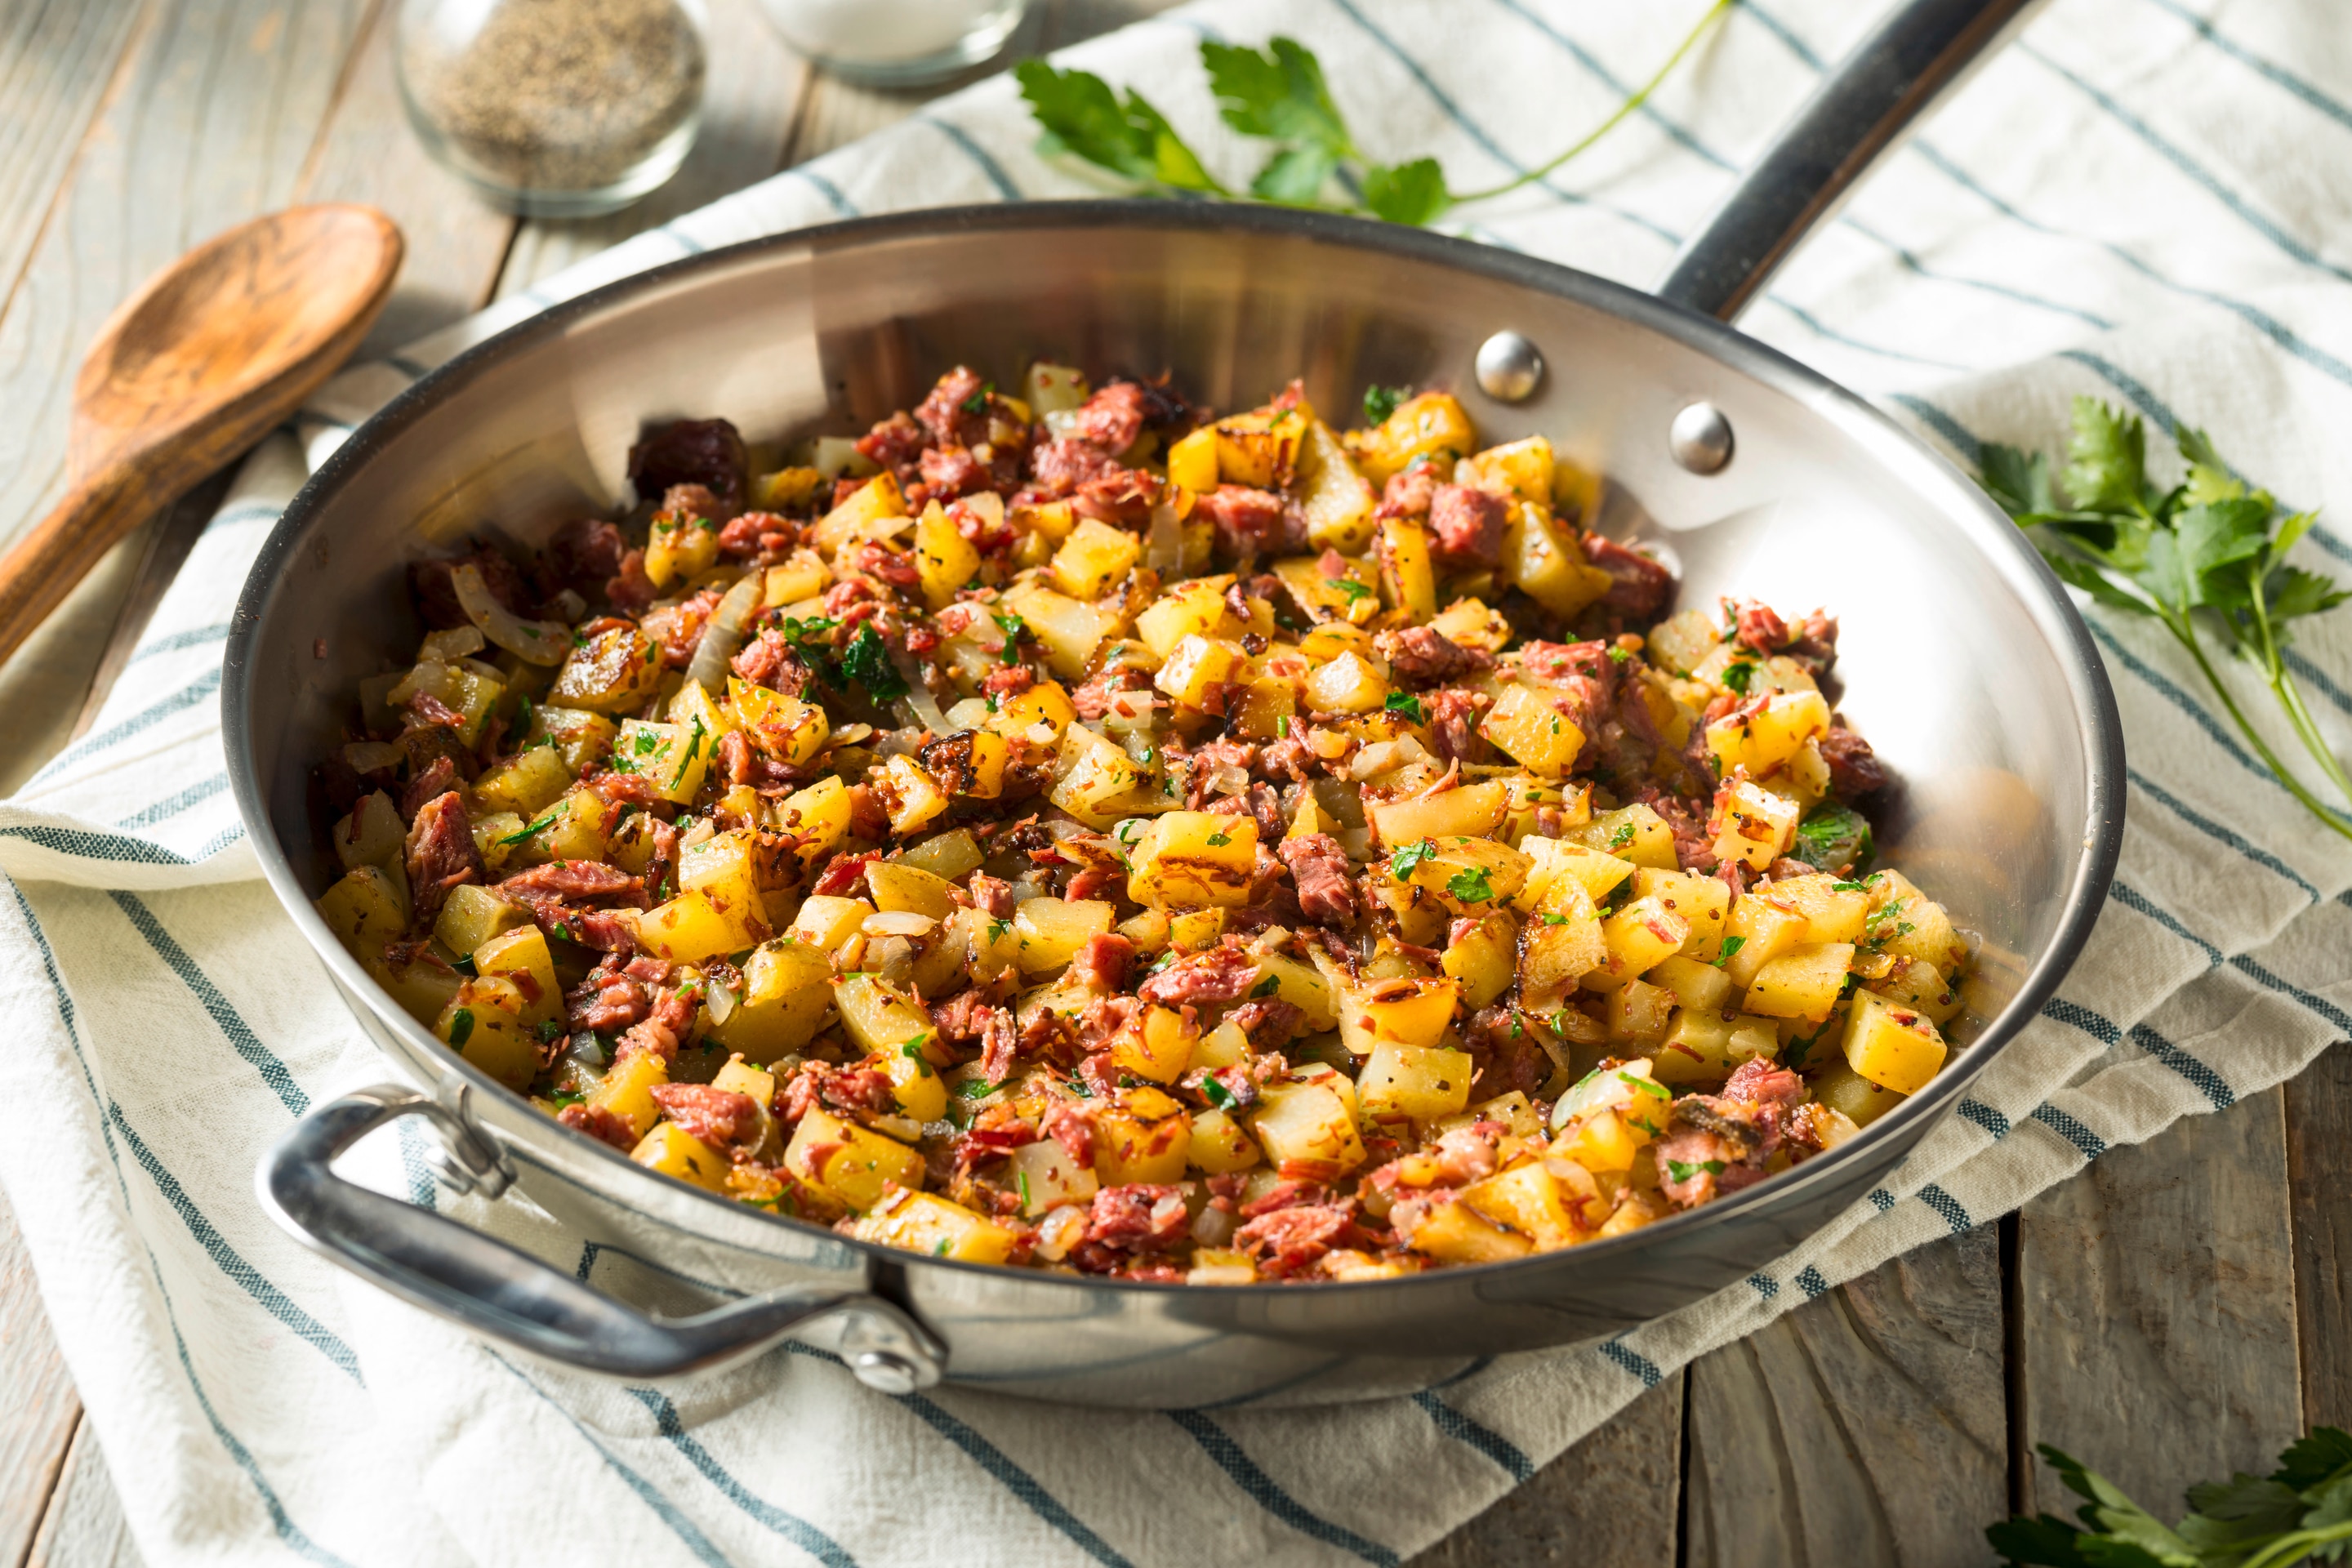 A pan of corned beef hash with potatoes and a generous sprinkling of parsley